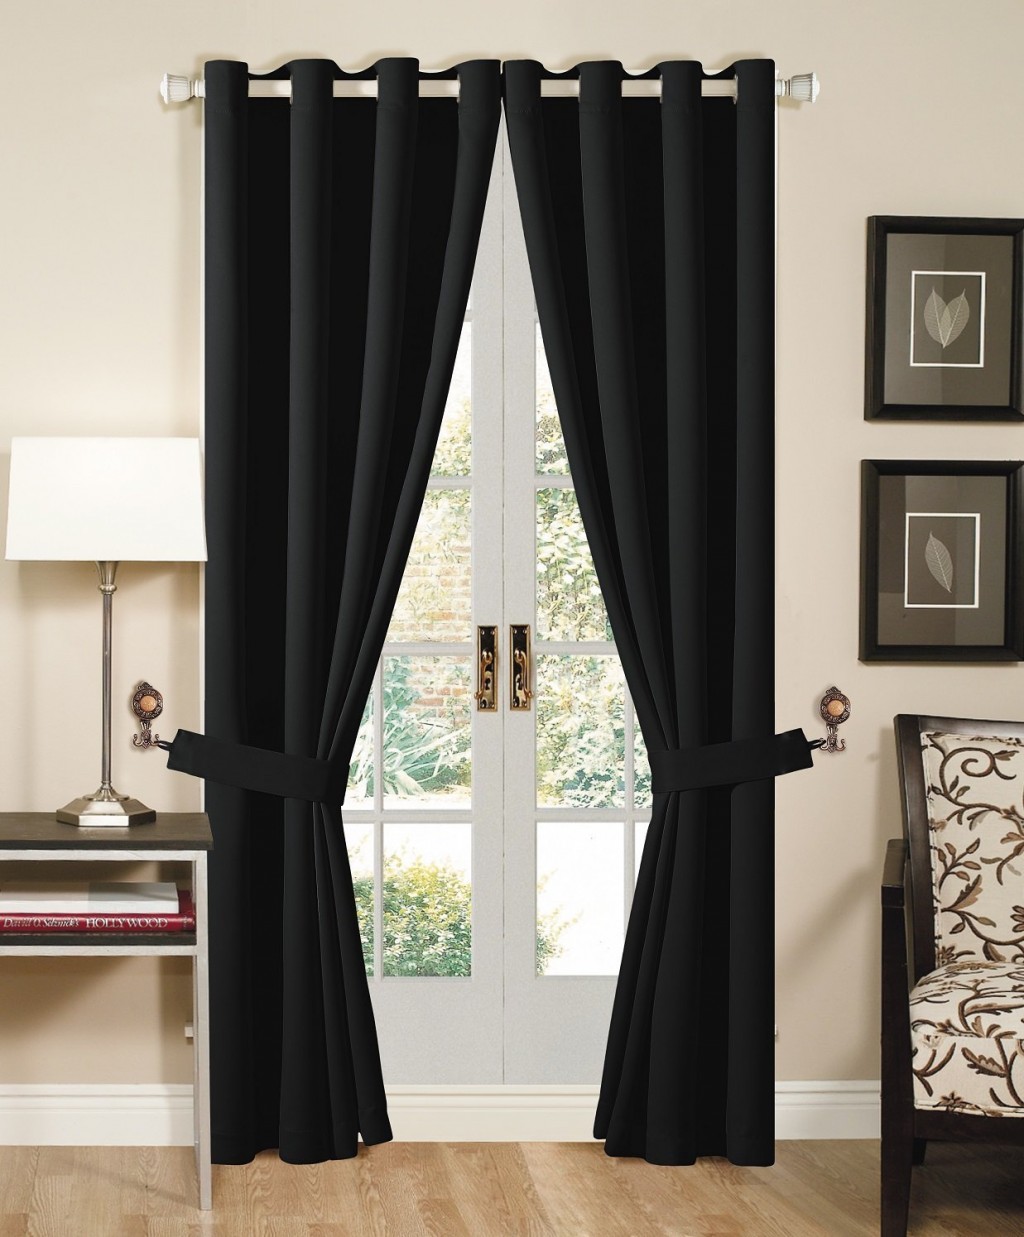 Thermal Insulated Curtains in Curtain